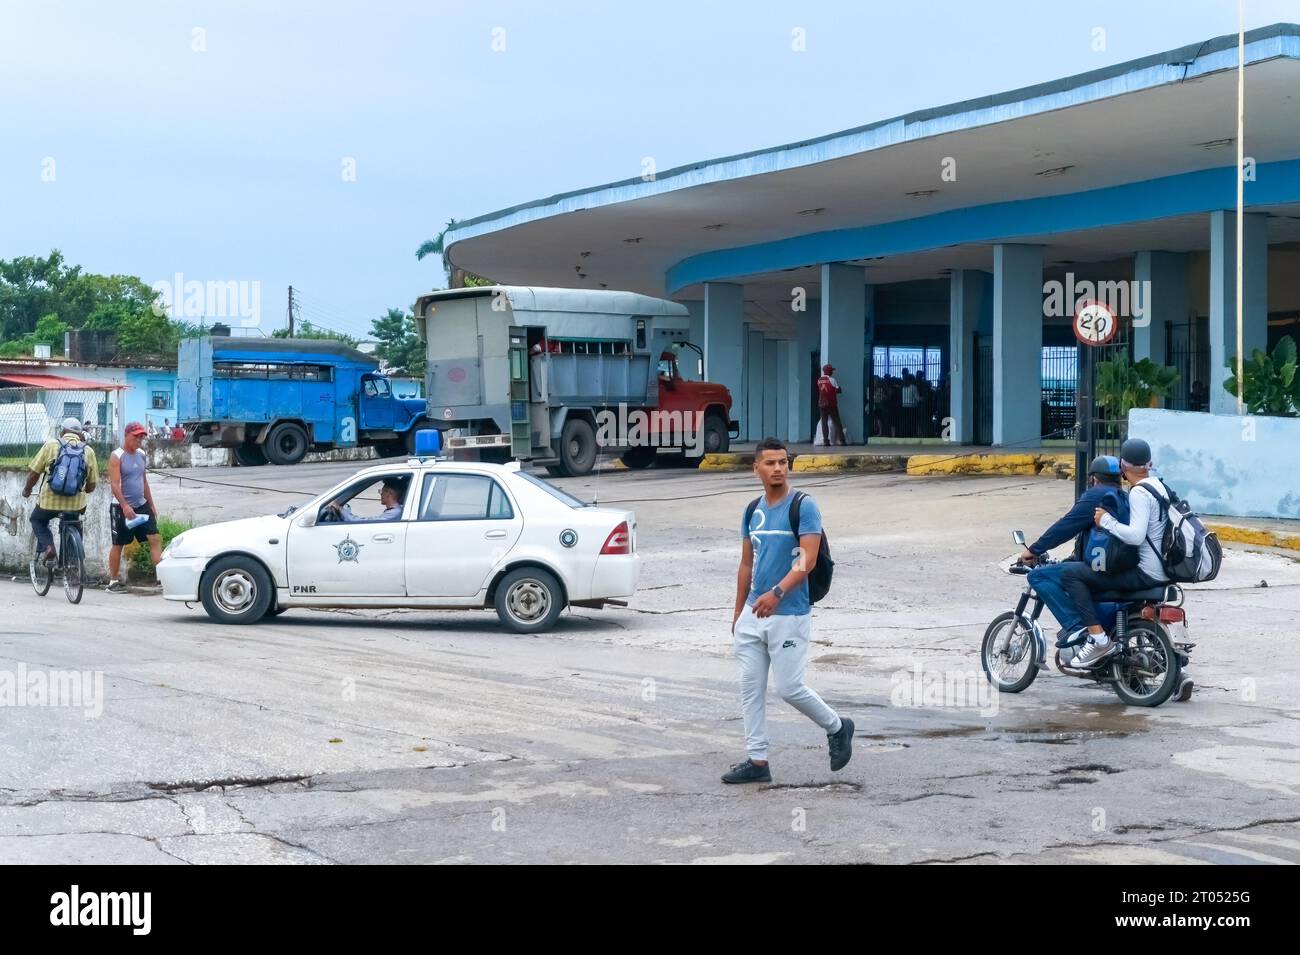 A PNR or Revolutionary National Police car drives by the Intermunicipal Bus Terminal. The patrol vehicle moves by a couple in a motorcycle and other i Stock Photo